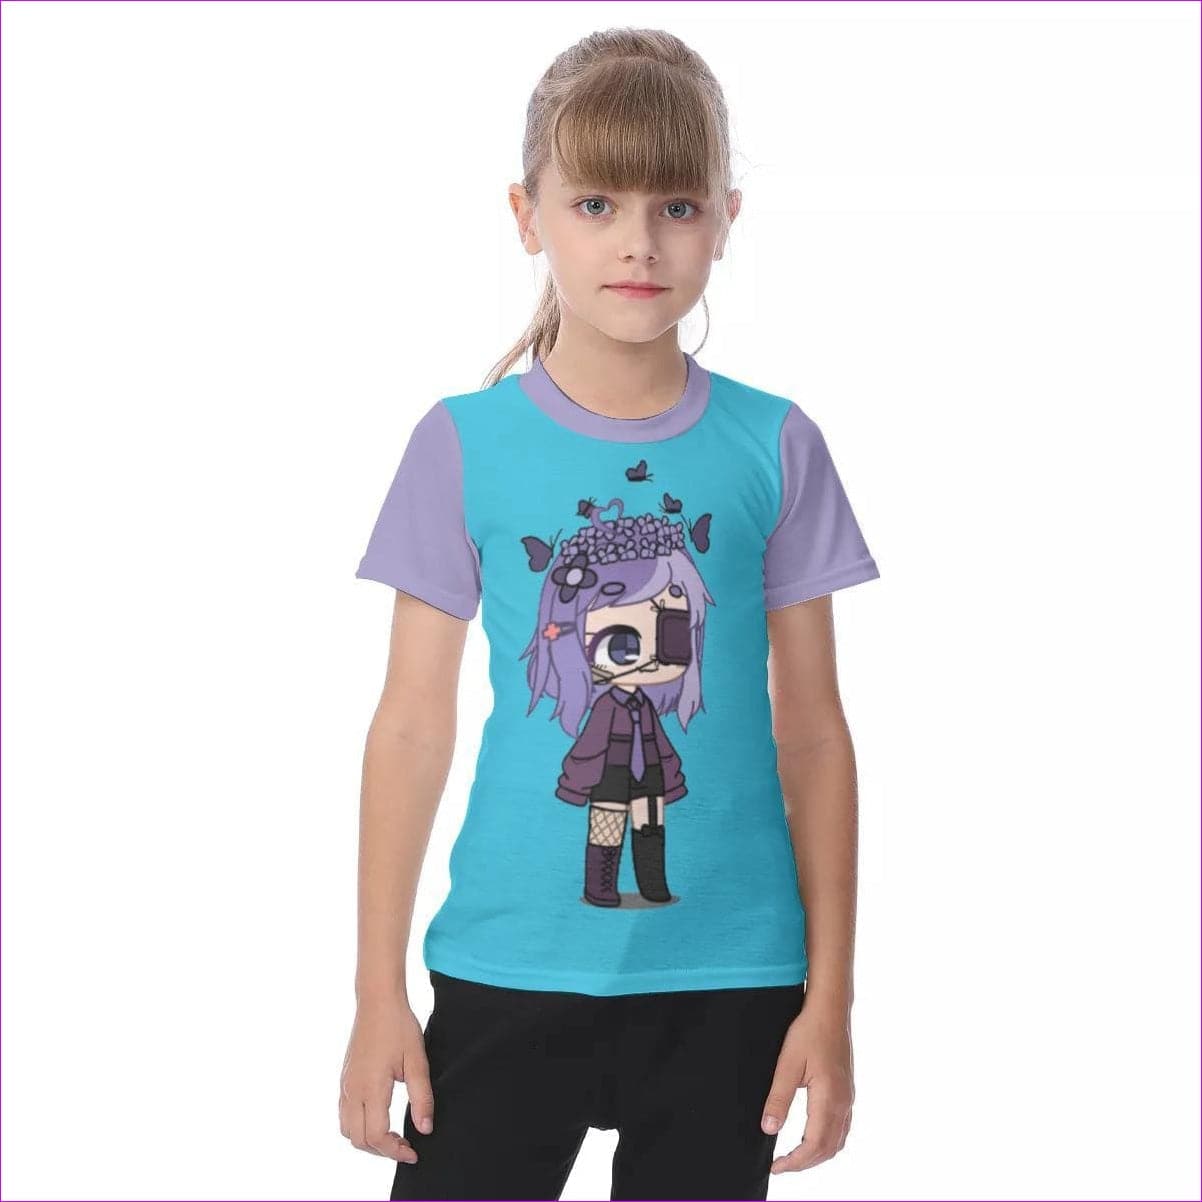 blue Bec's Girl Oversized Kids Graphic Tee - kid's t-shirts at TFC&H Co.